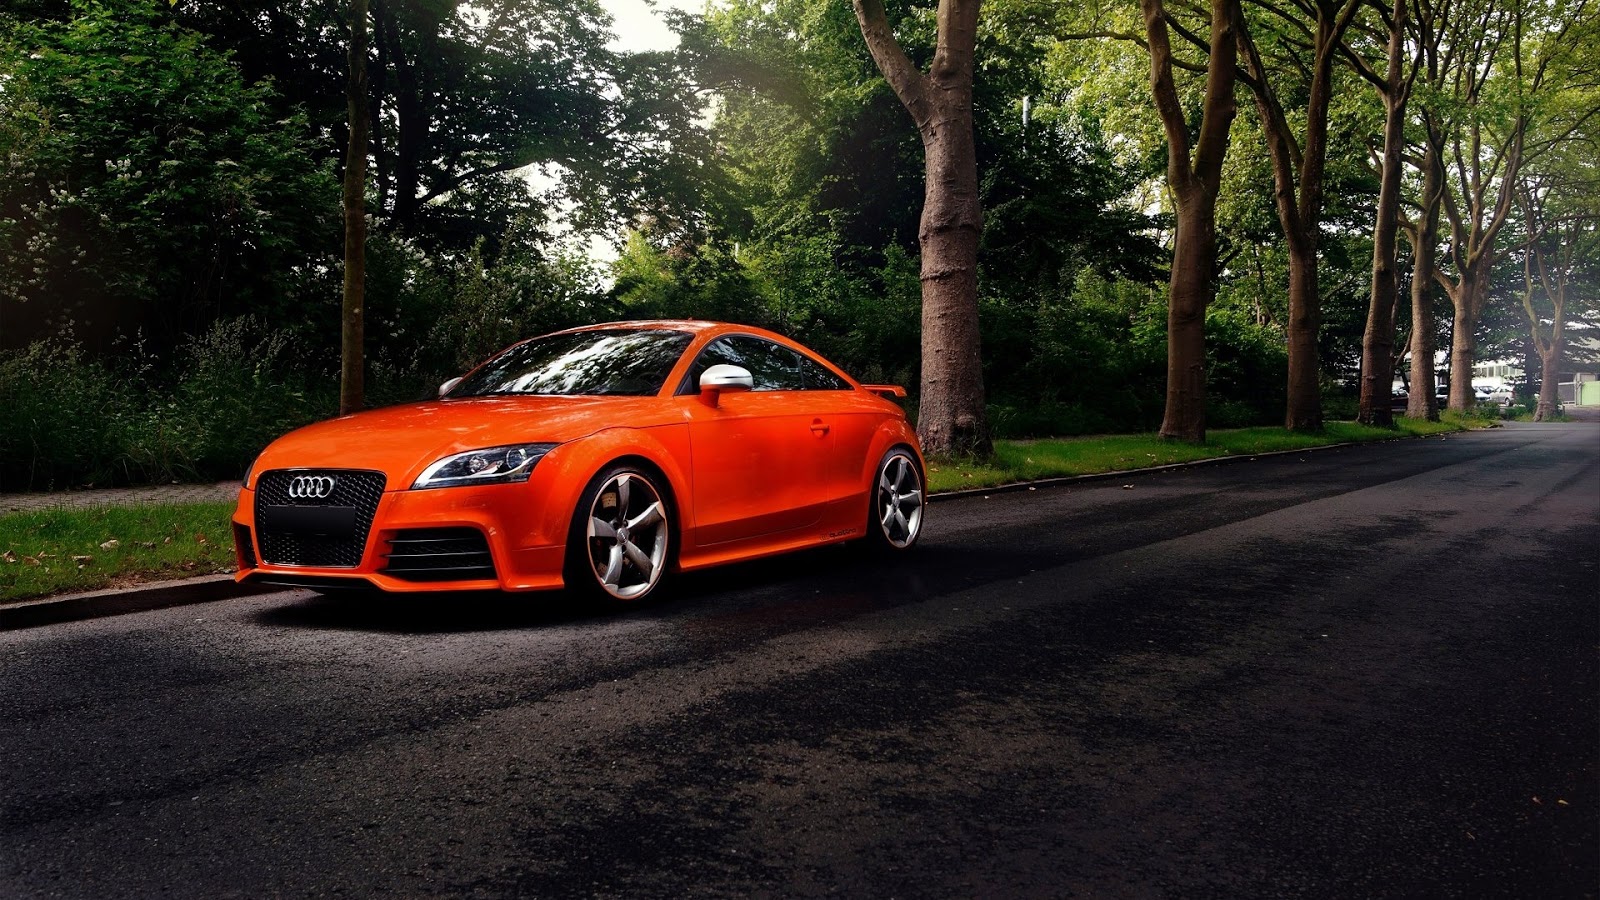 Audi Wallpapers pack for your desktop's background wallpaper: